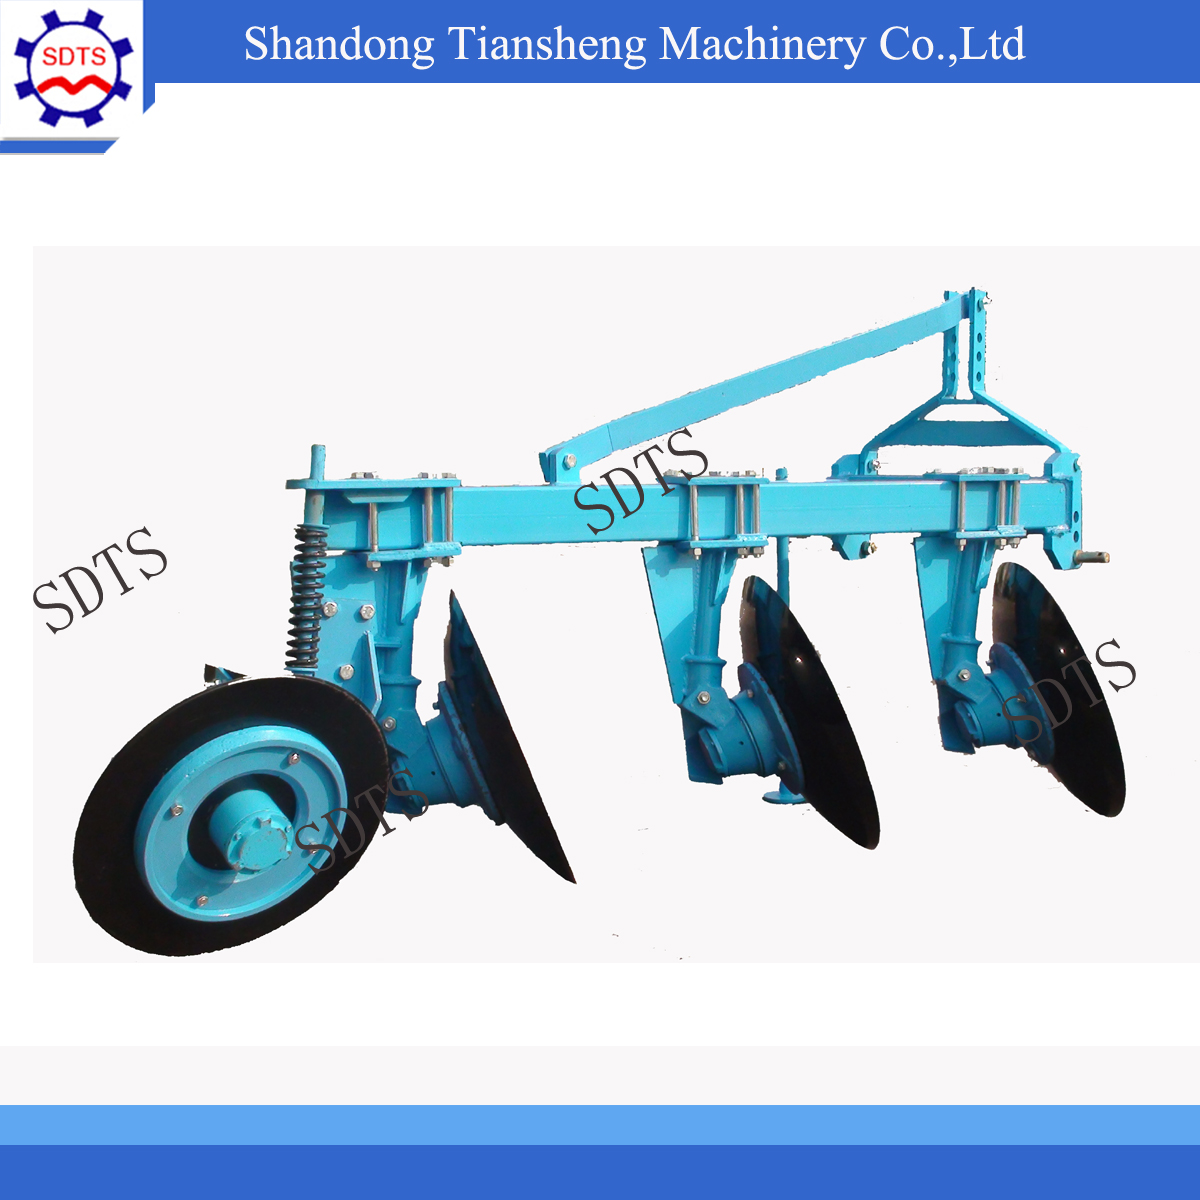 1LY(T)-325 Mouldboard disc plow /plough for agriculture machinery and tractors